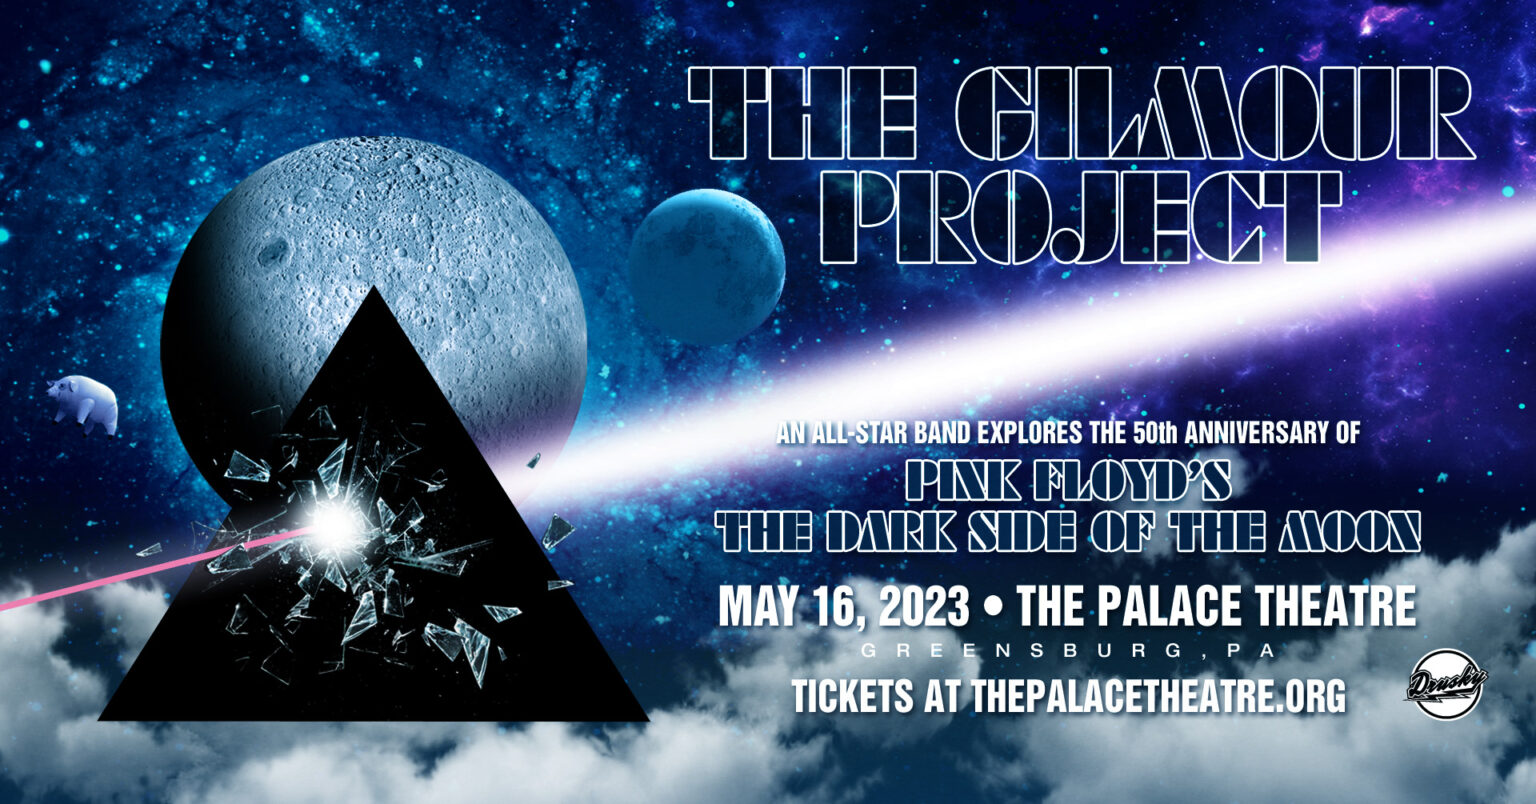 the gilmour project tour 2023